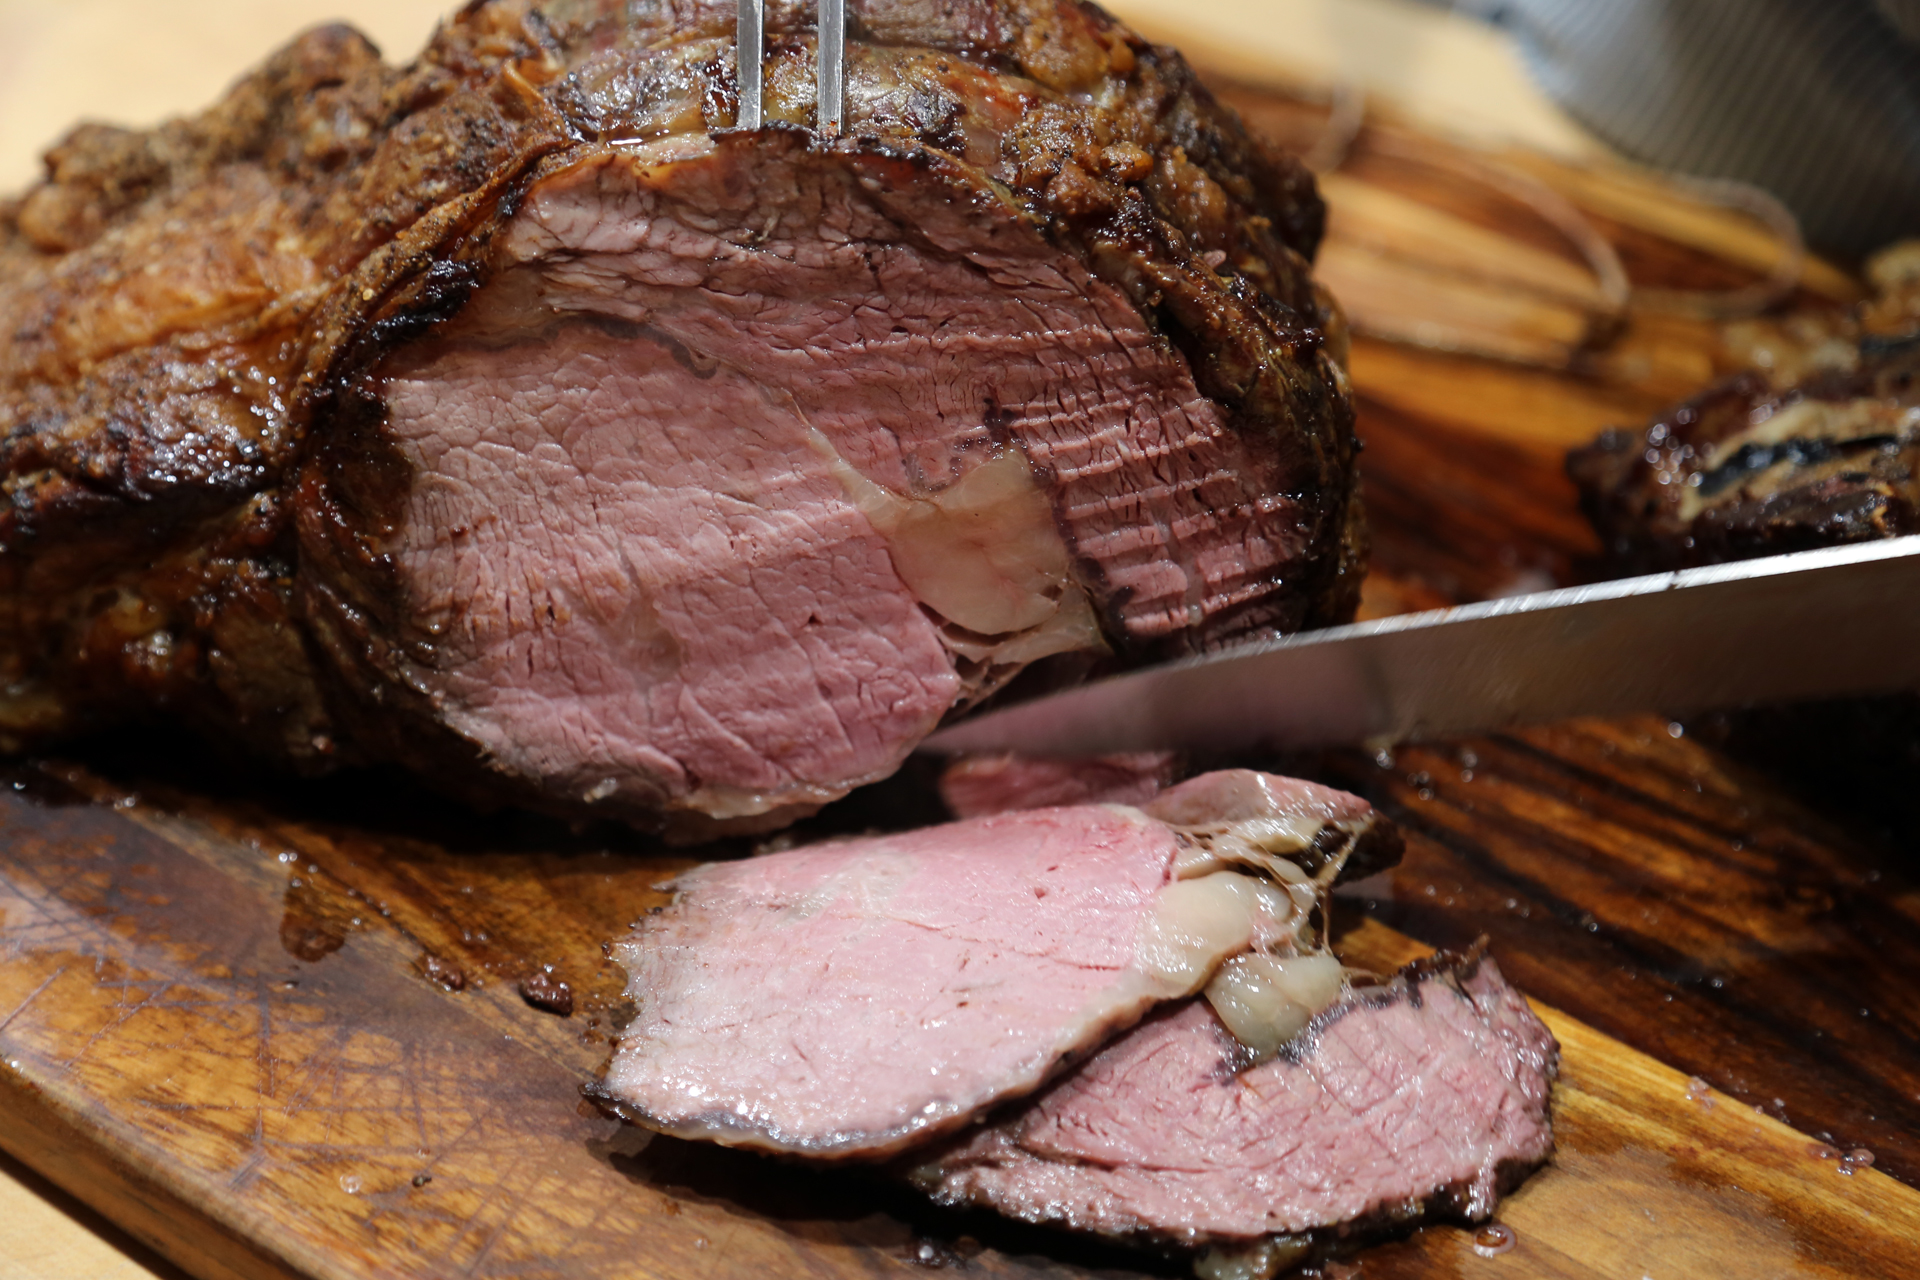 To serve, carve the roast into 1/4 to 1/2 inch thick slices.